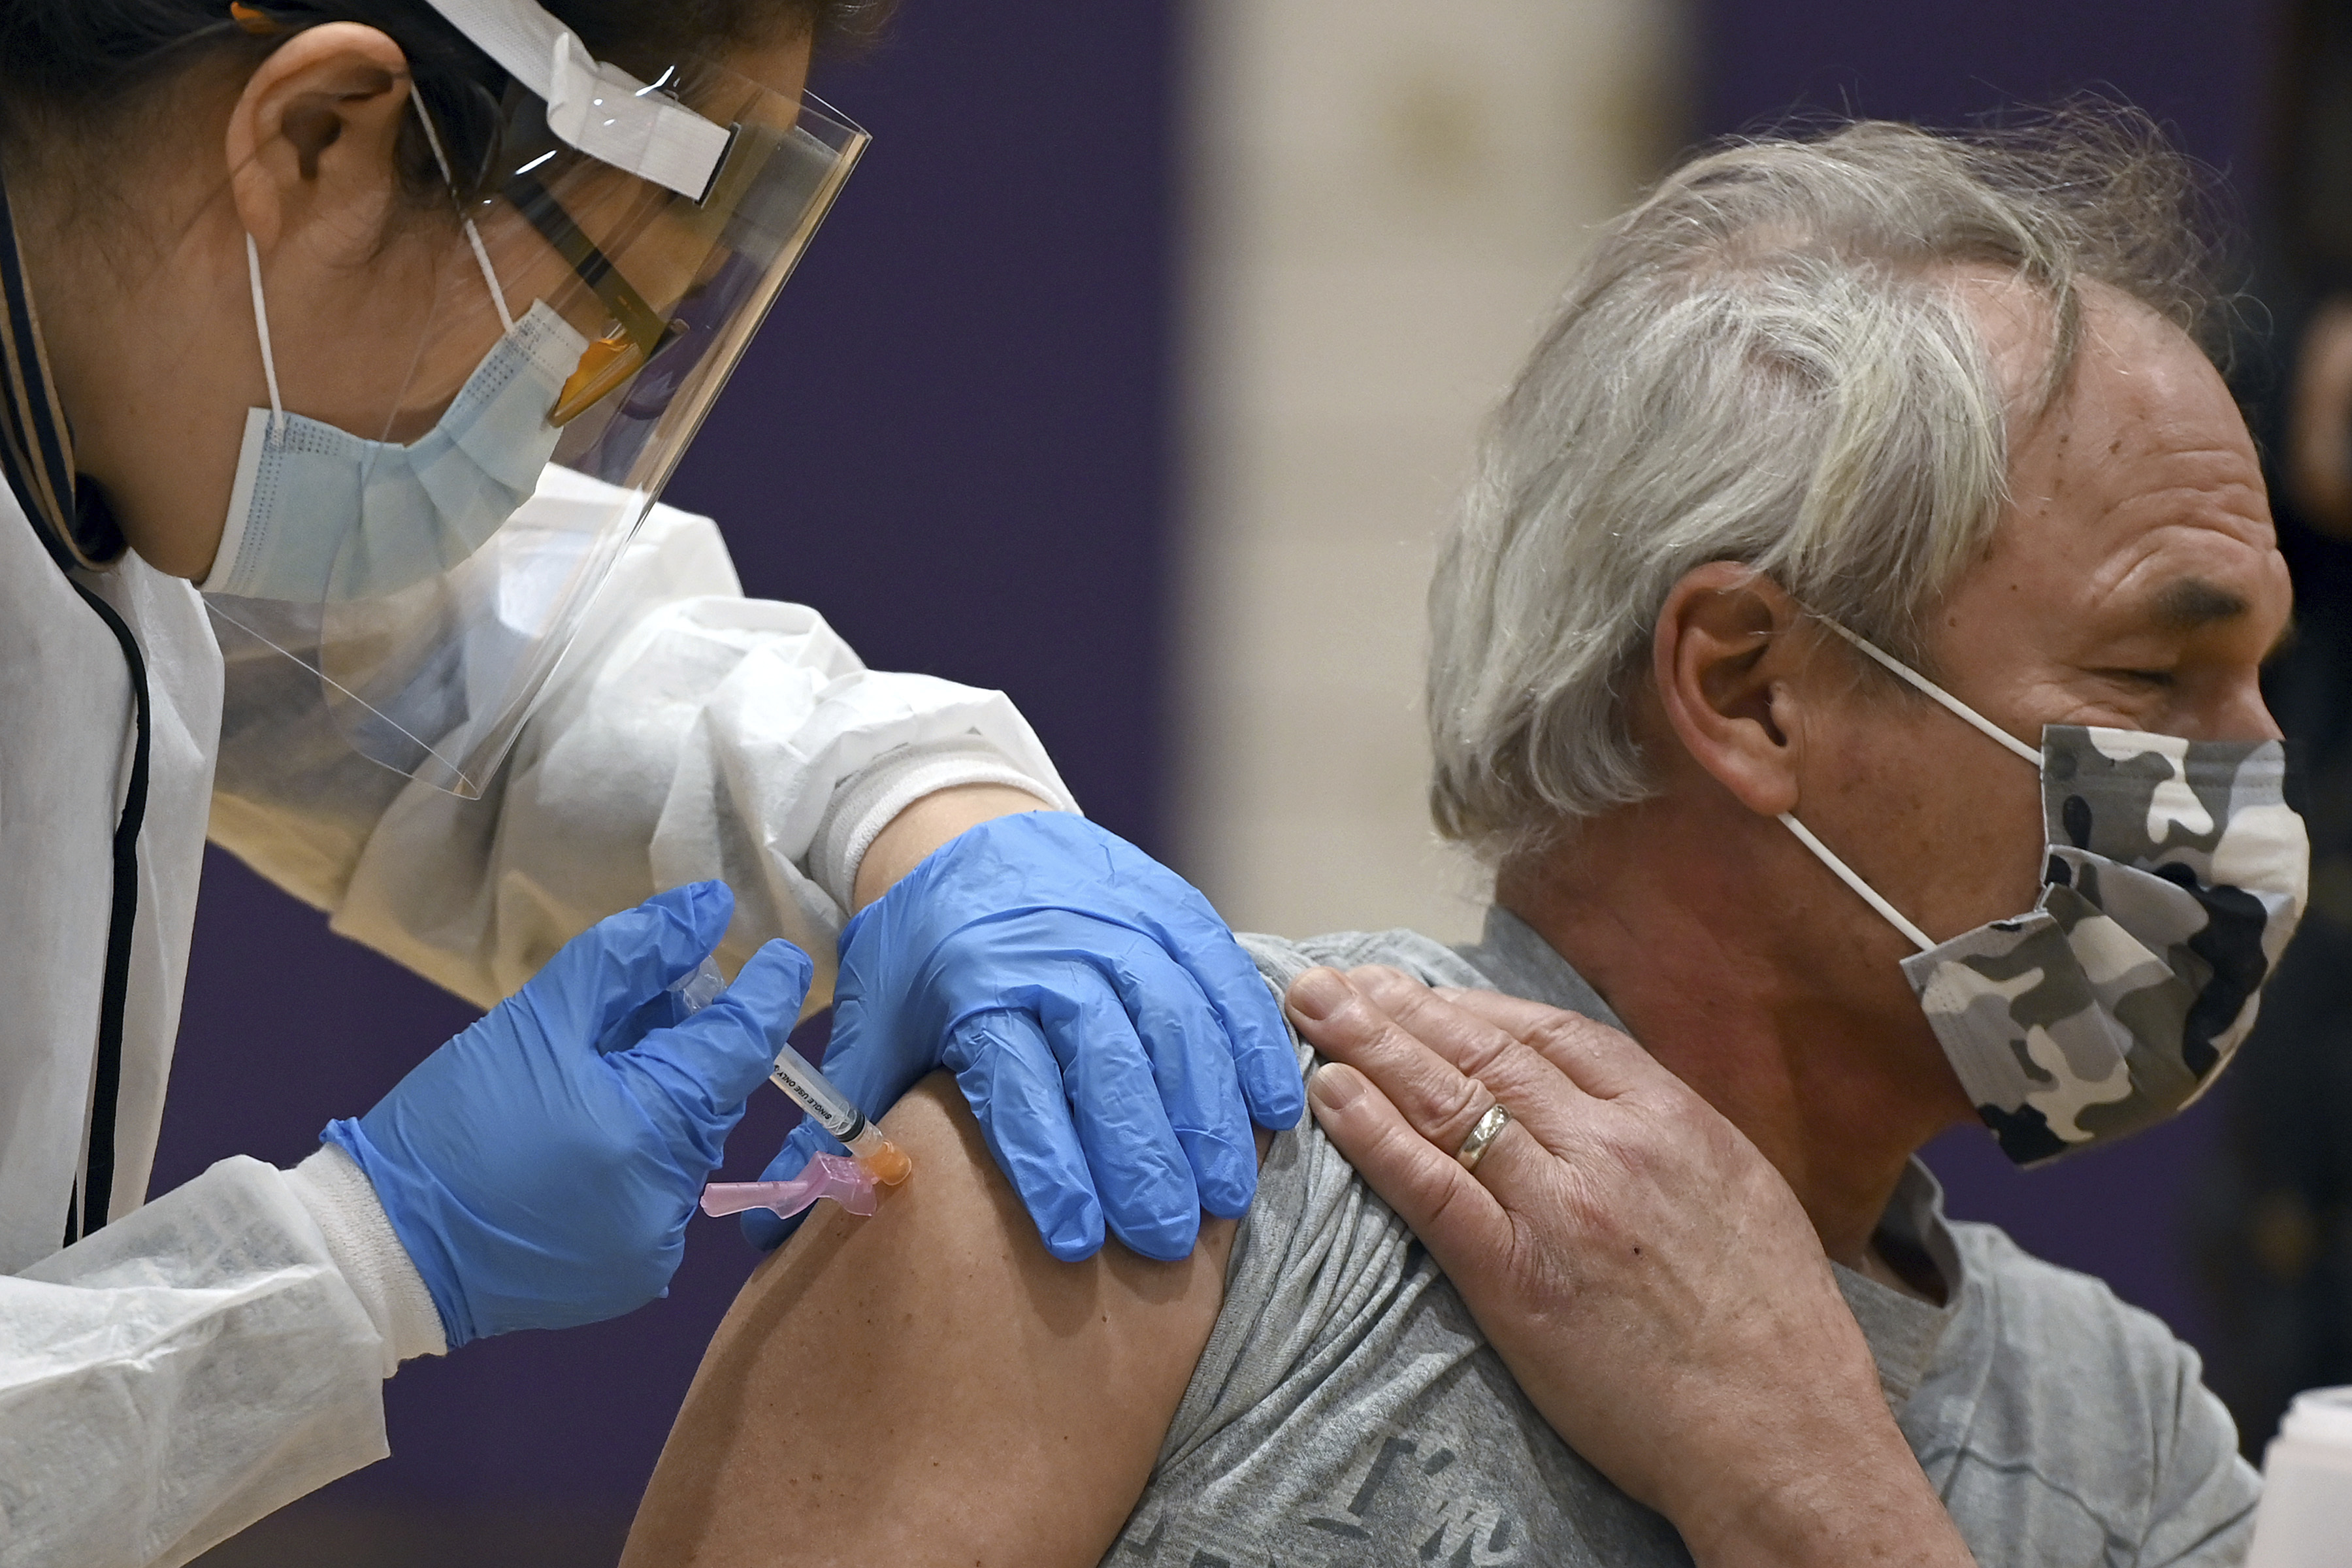 A man recieves a dose of Moderna COVID-19 vaccine inside Hillcrest High School, a designated New York City priority vaccination center for people in group 1B, in the Queens borough of New York City